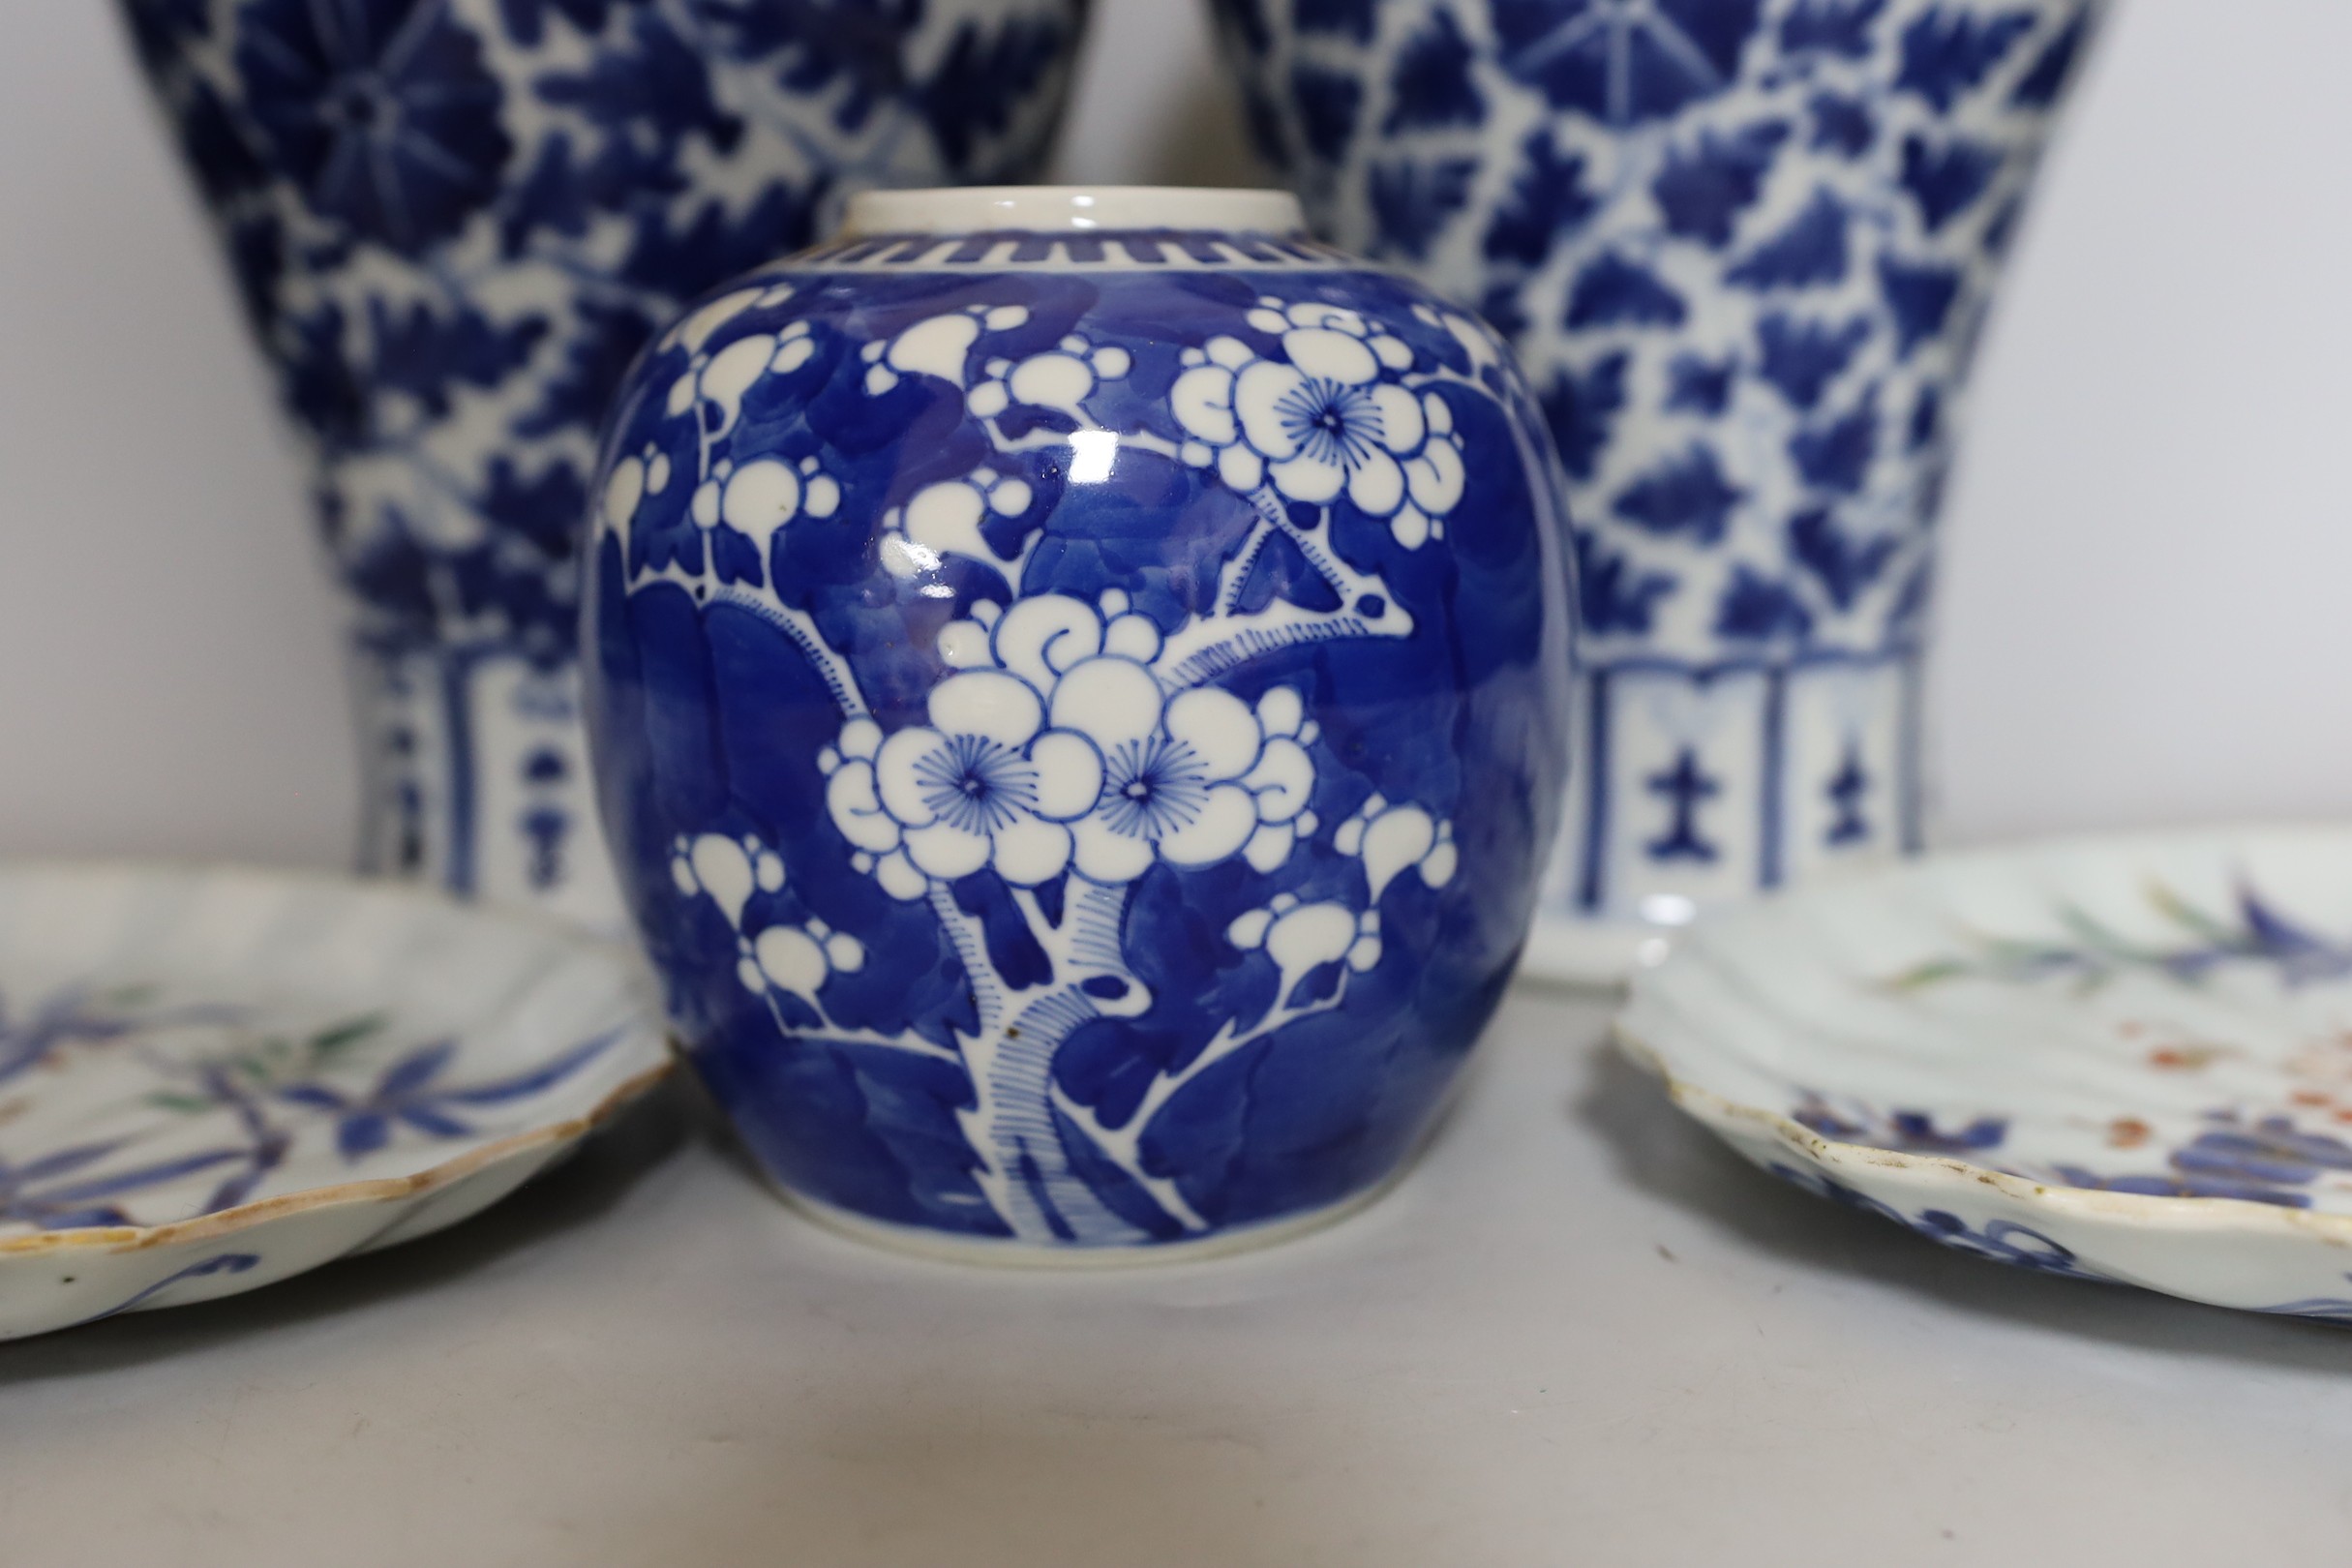 Two early 20th century Chinese blue and white vases with lion dog covers, together with a blue and white prunus jar and a pair of Japanese export flower dishes, and covers 33cm high